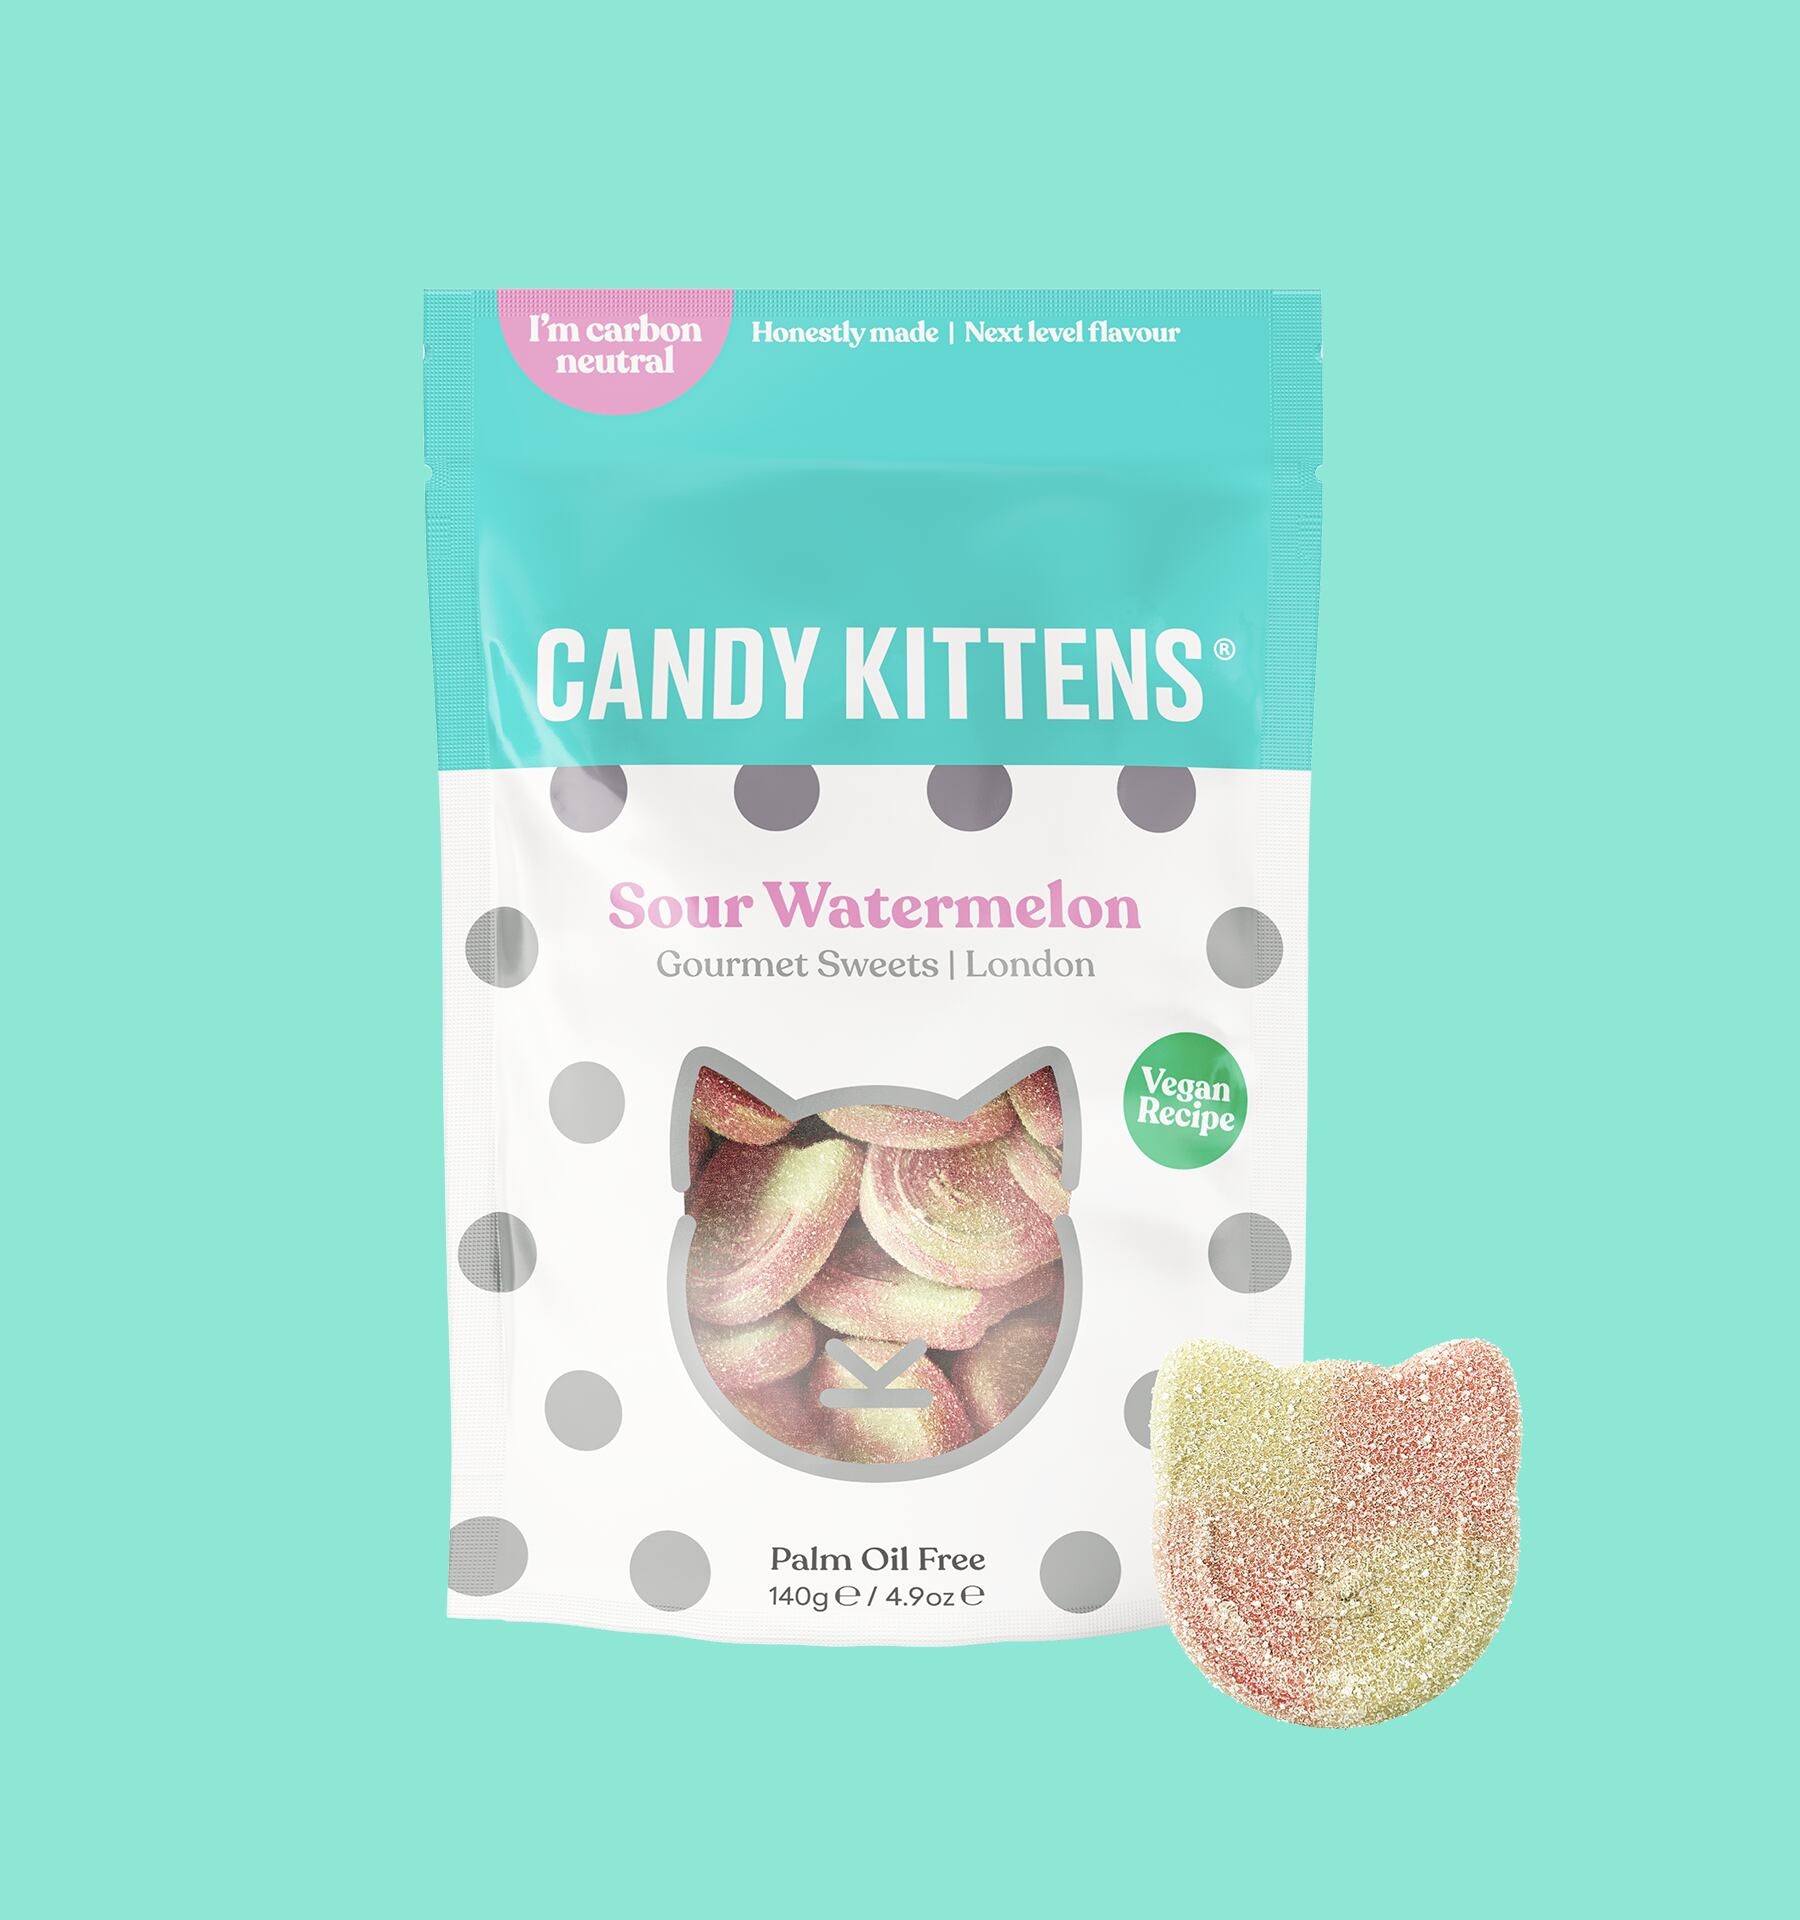 Candy Kittens Sweets 140G Bag, Sour Watermelon